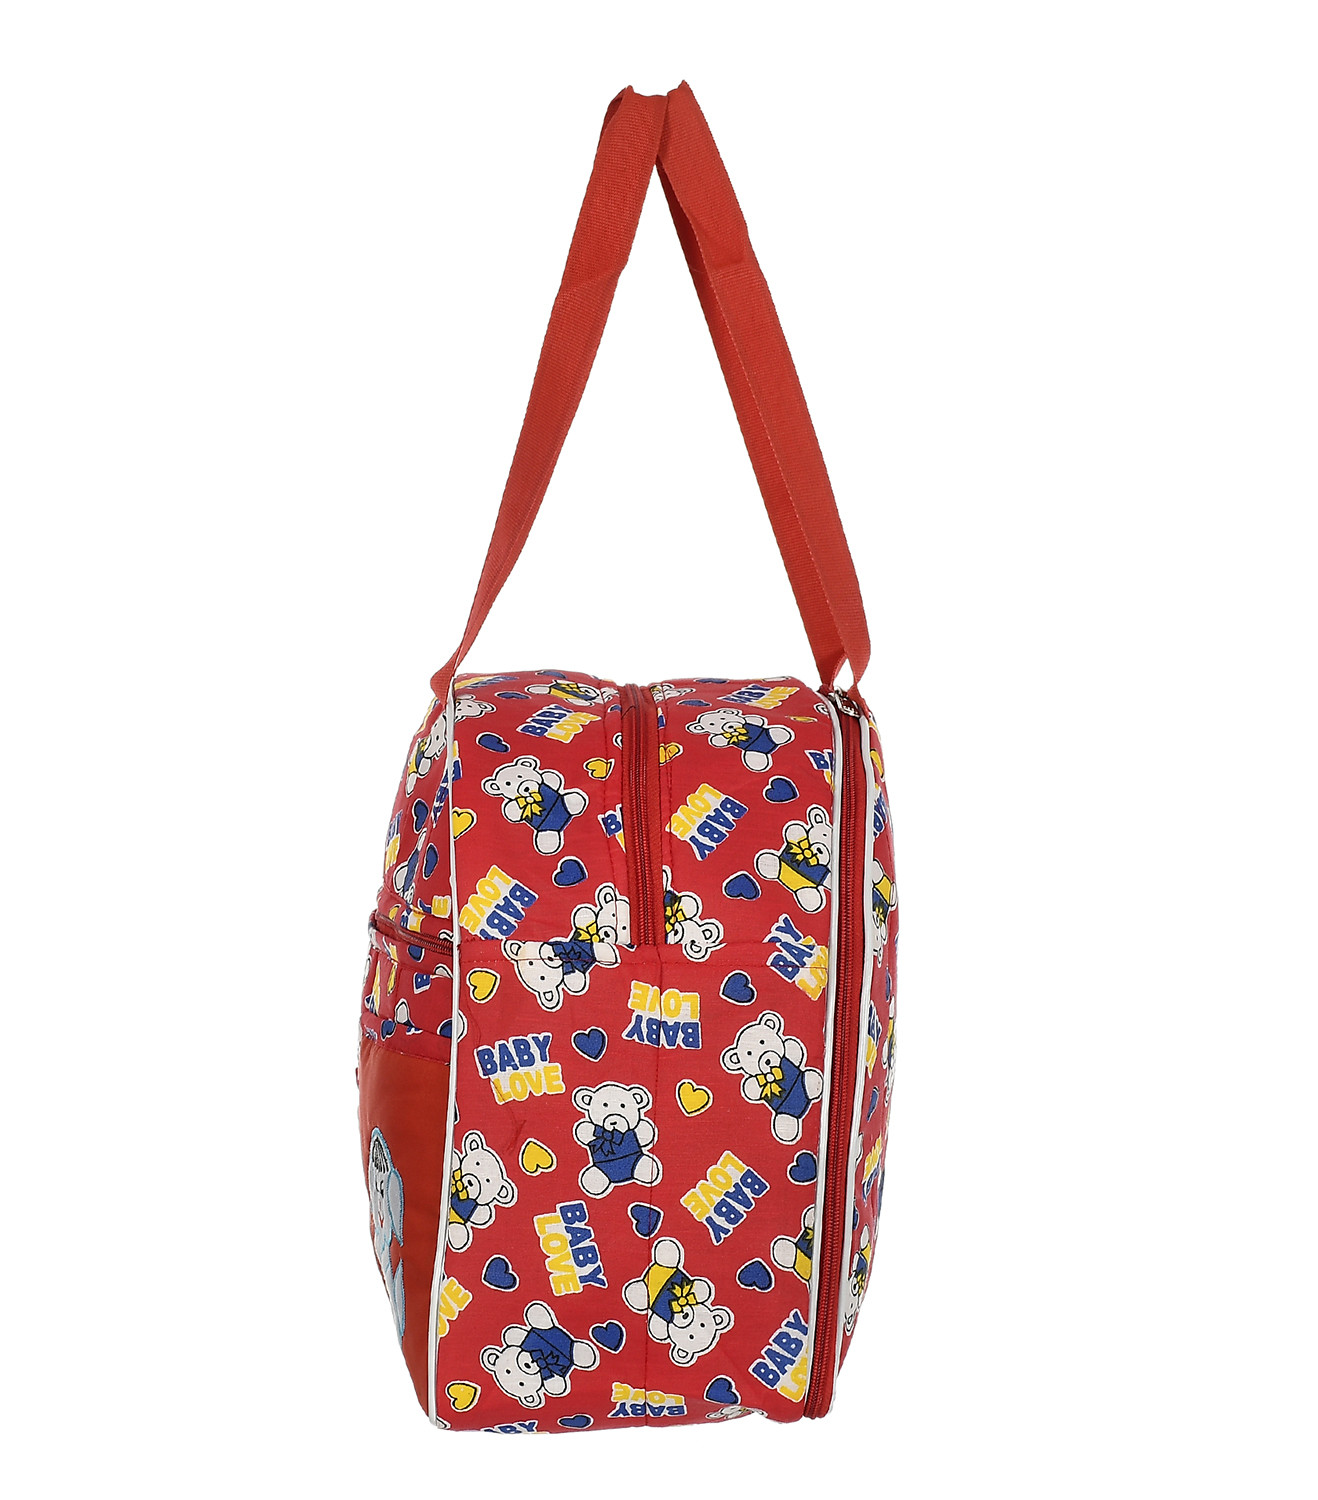 Kuber Industries Cotton Multiuses Teddy Print Mothers Bag/Diapers Bags With Handle For Traveling & Storing (Red)